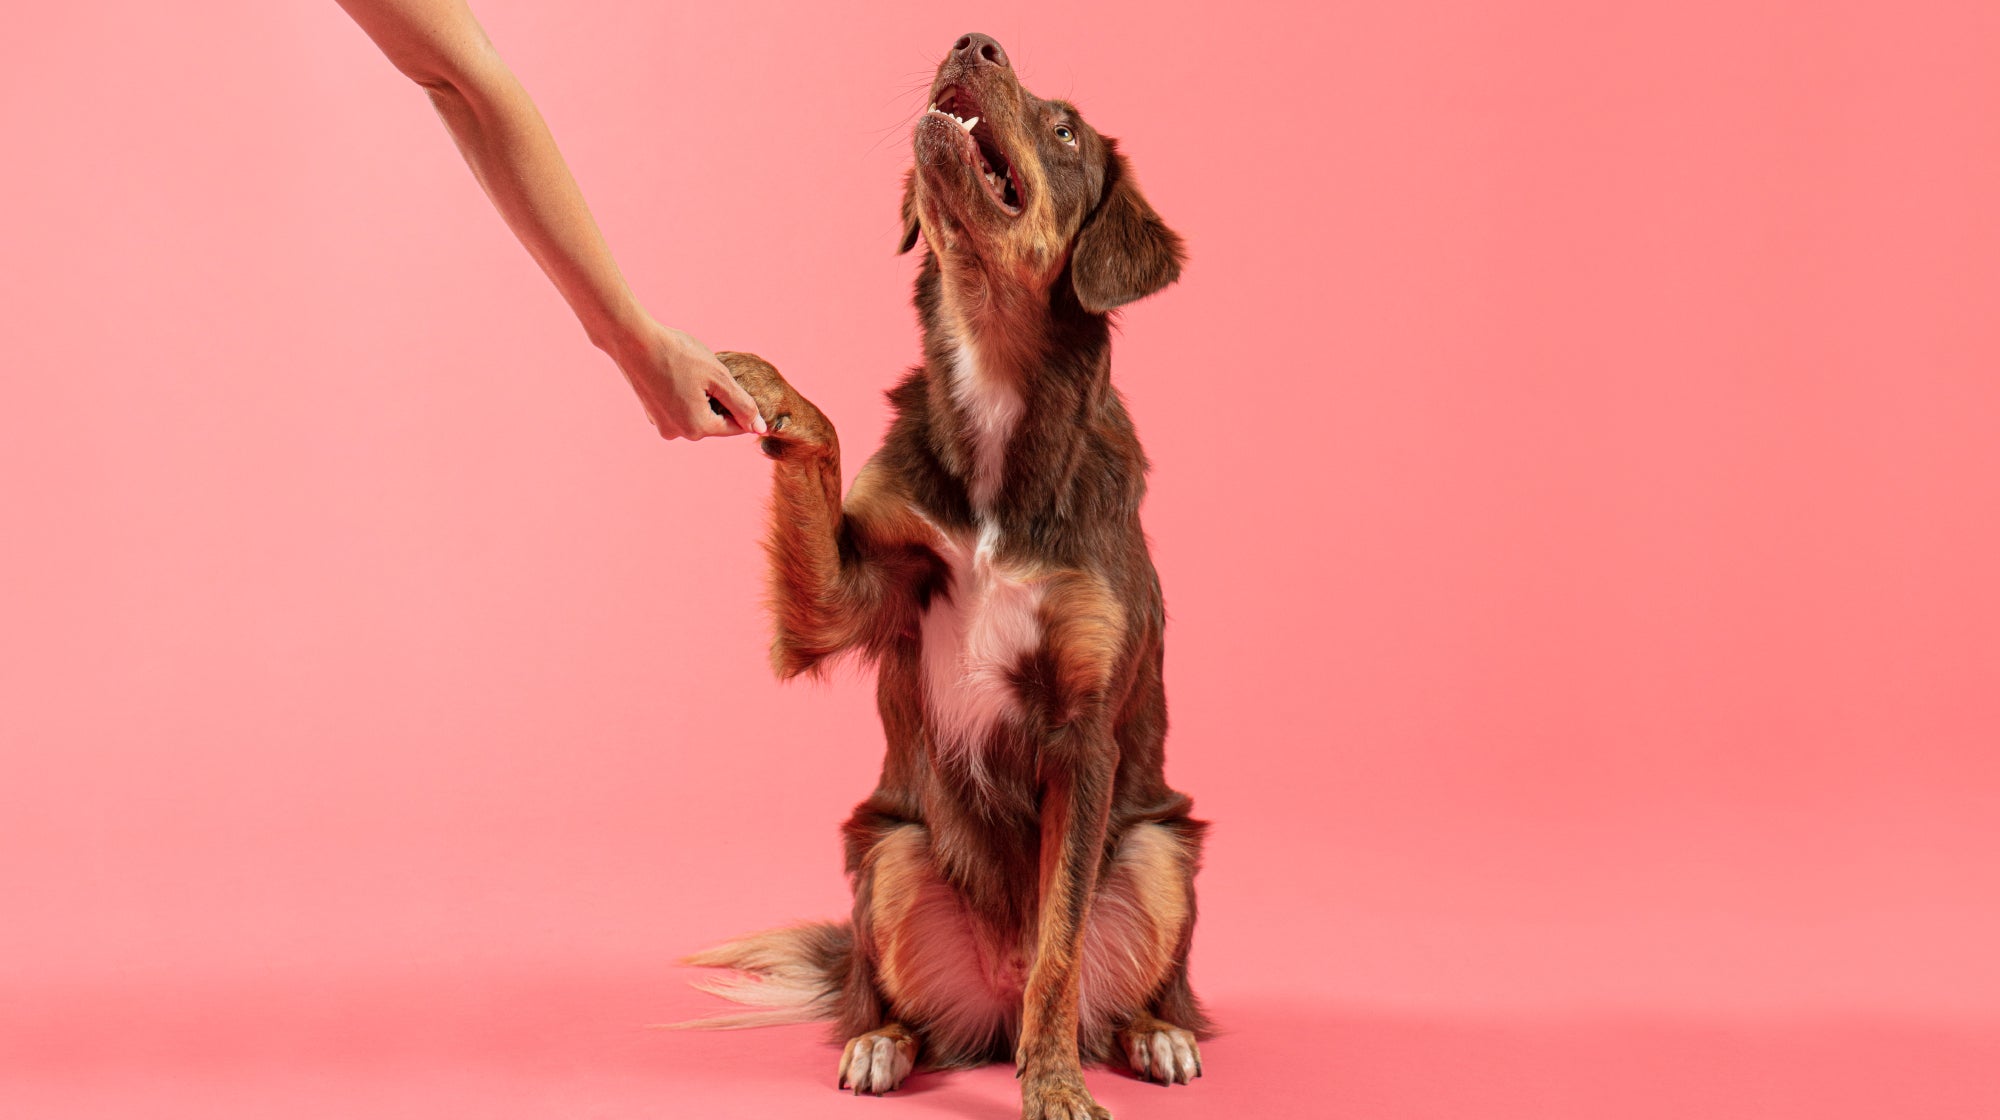 A brown and tan dog giving their paw, against a pale pink backdrop